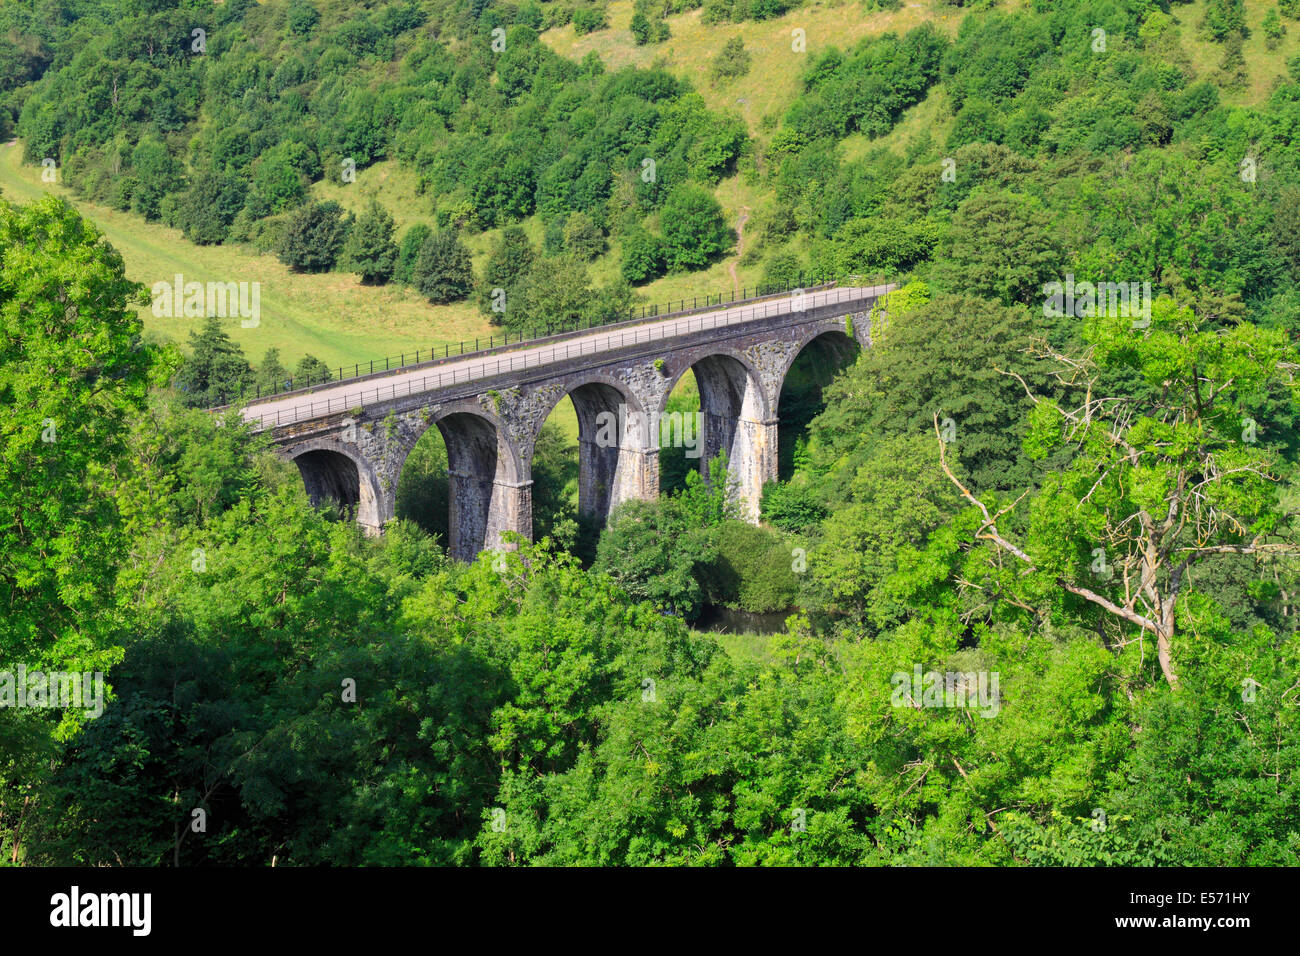 Headstone Viaduct and the Monsal Trail from Monsal Head, Derbyshire Peak District National Park, England, UK. Stock Photo